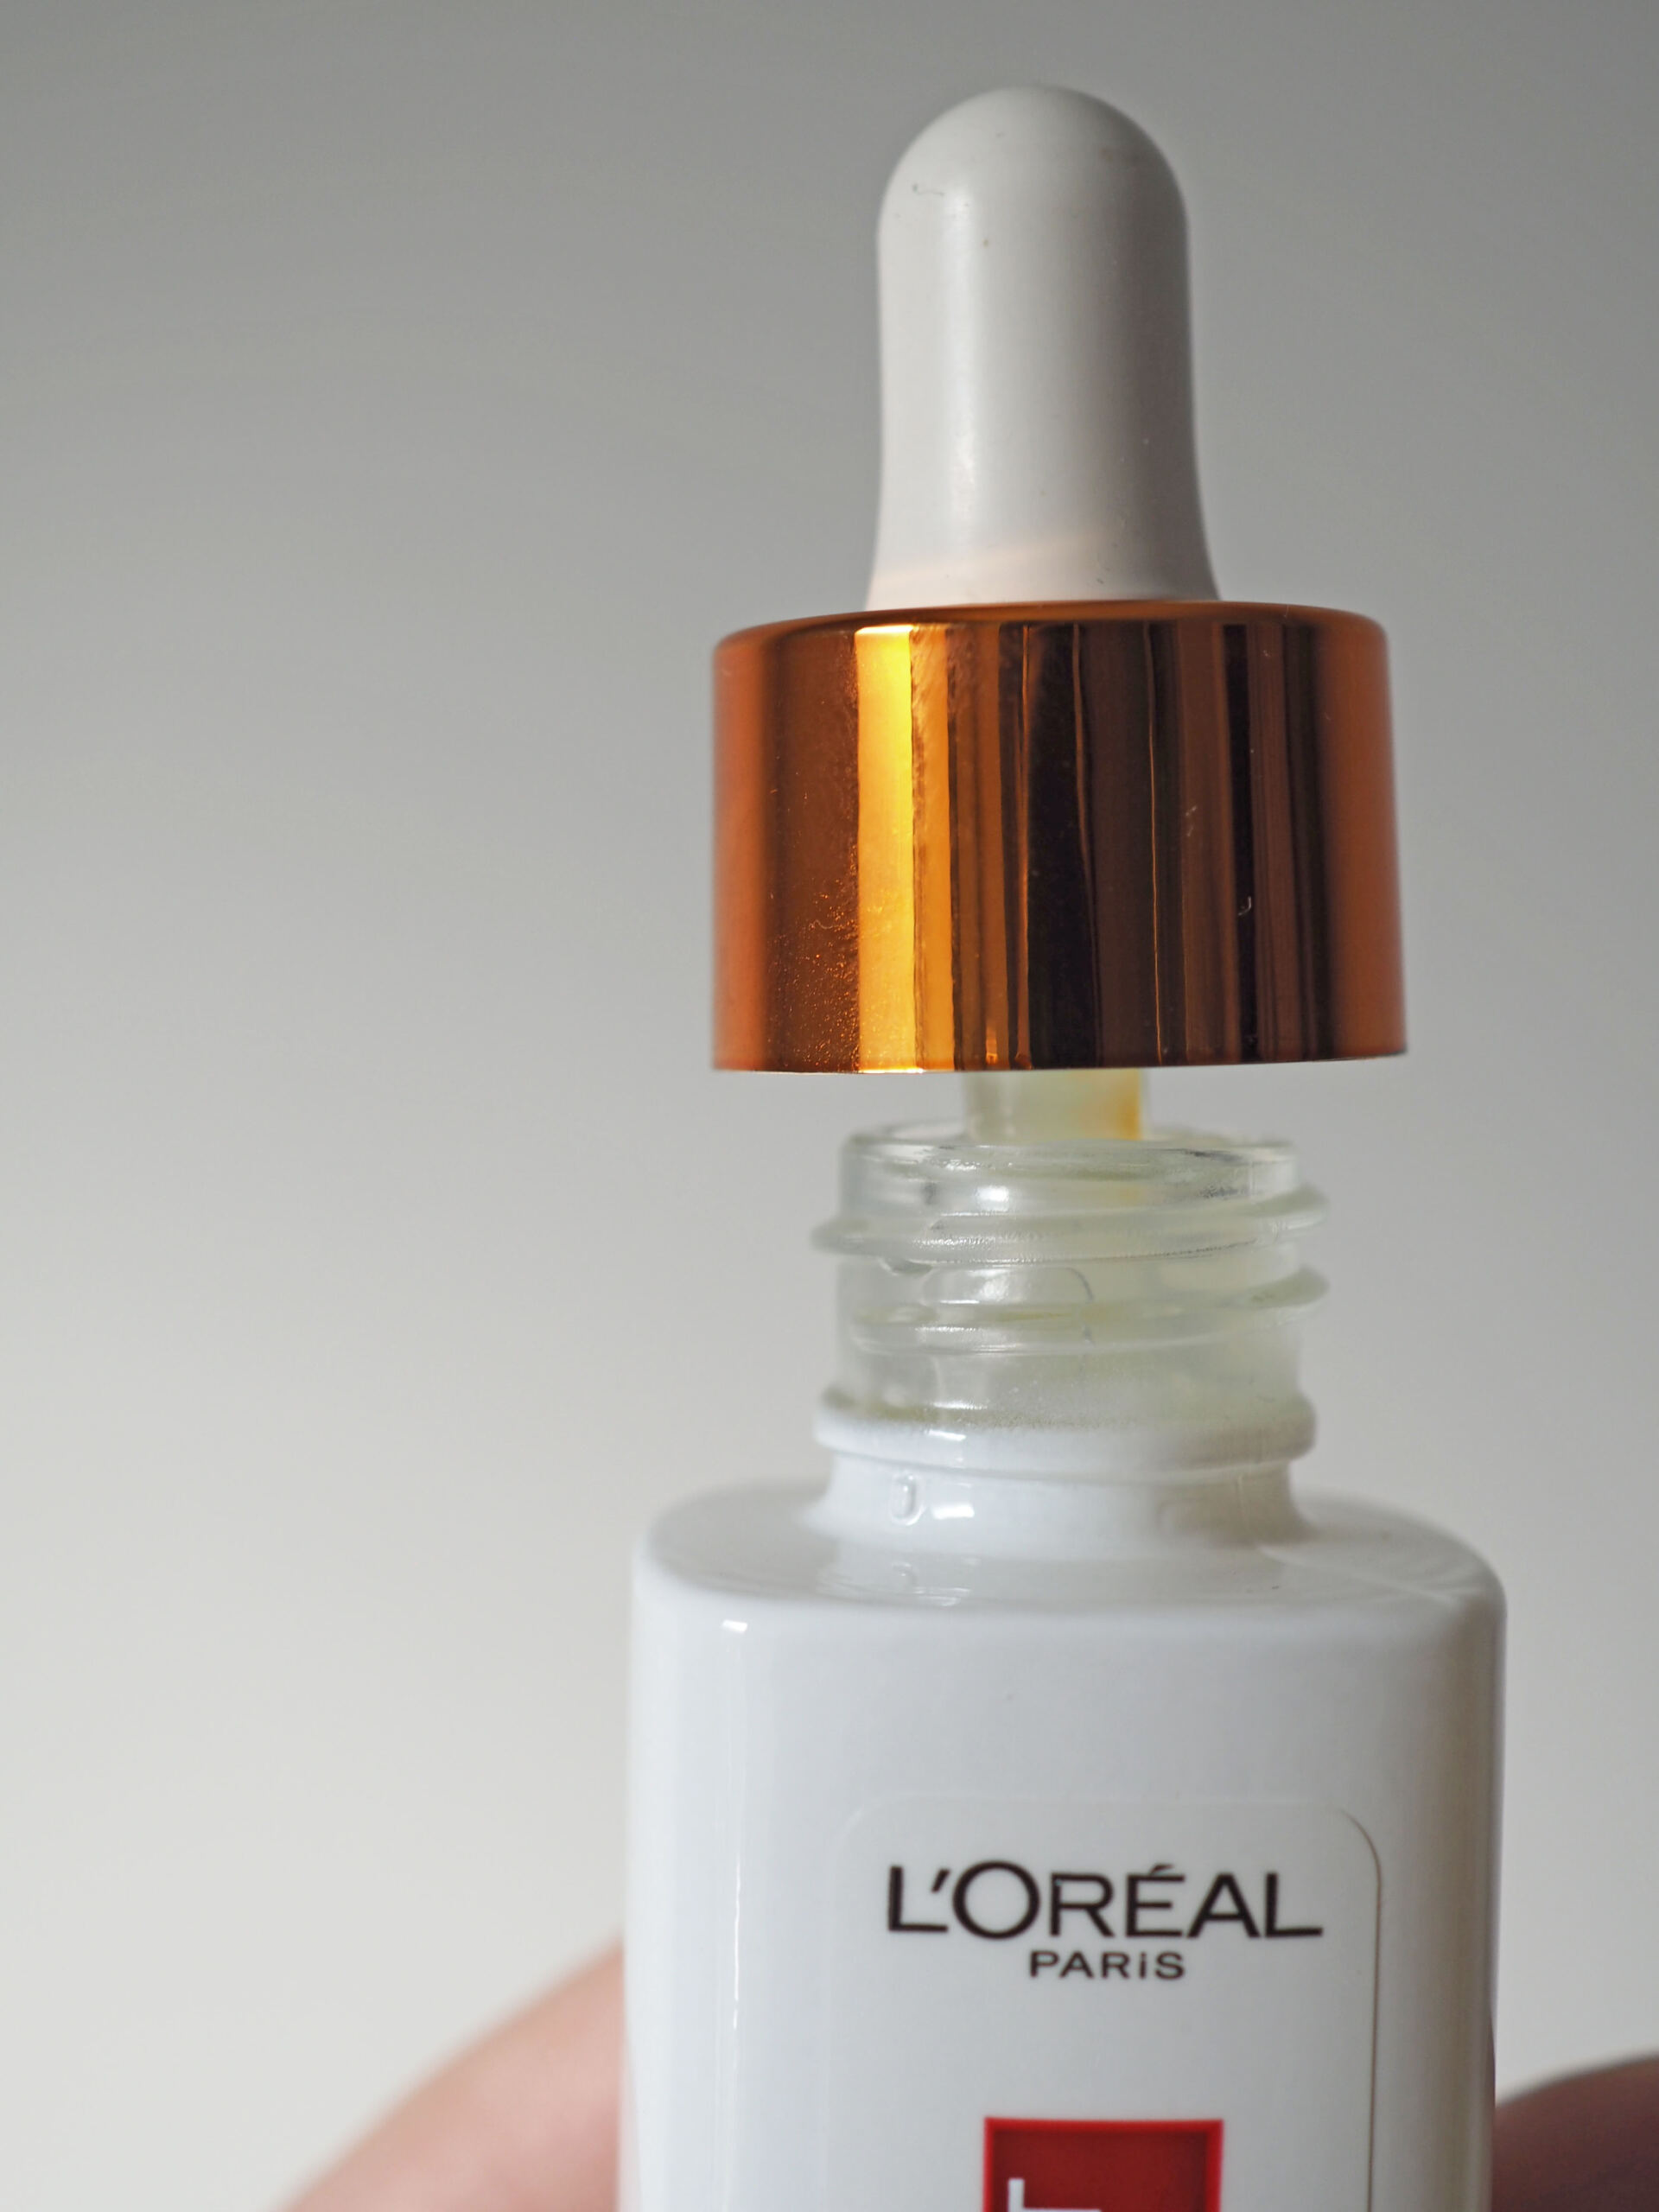 An Affordable Vitamin C Serum : The L'Oreal Revitalift Clinical 12% Pure Vitamin Serum Review. - Louise + Beauty